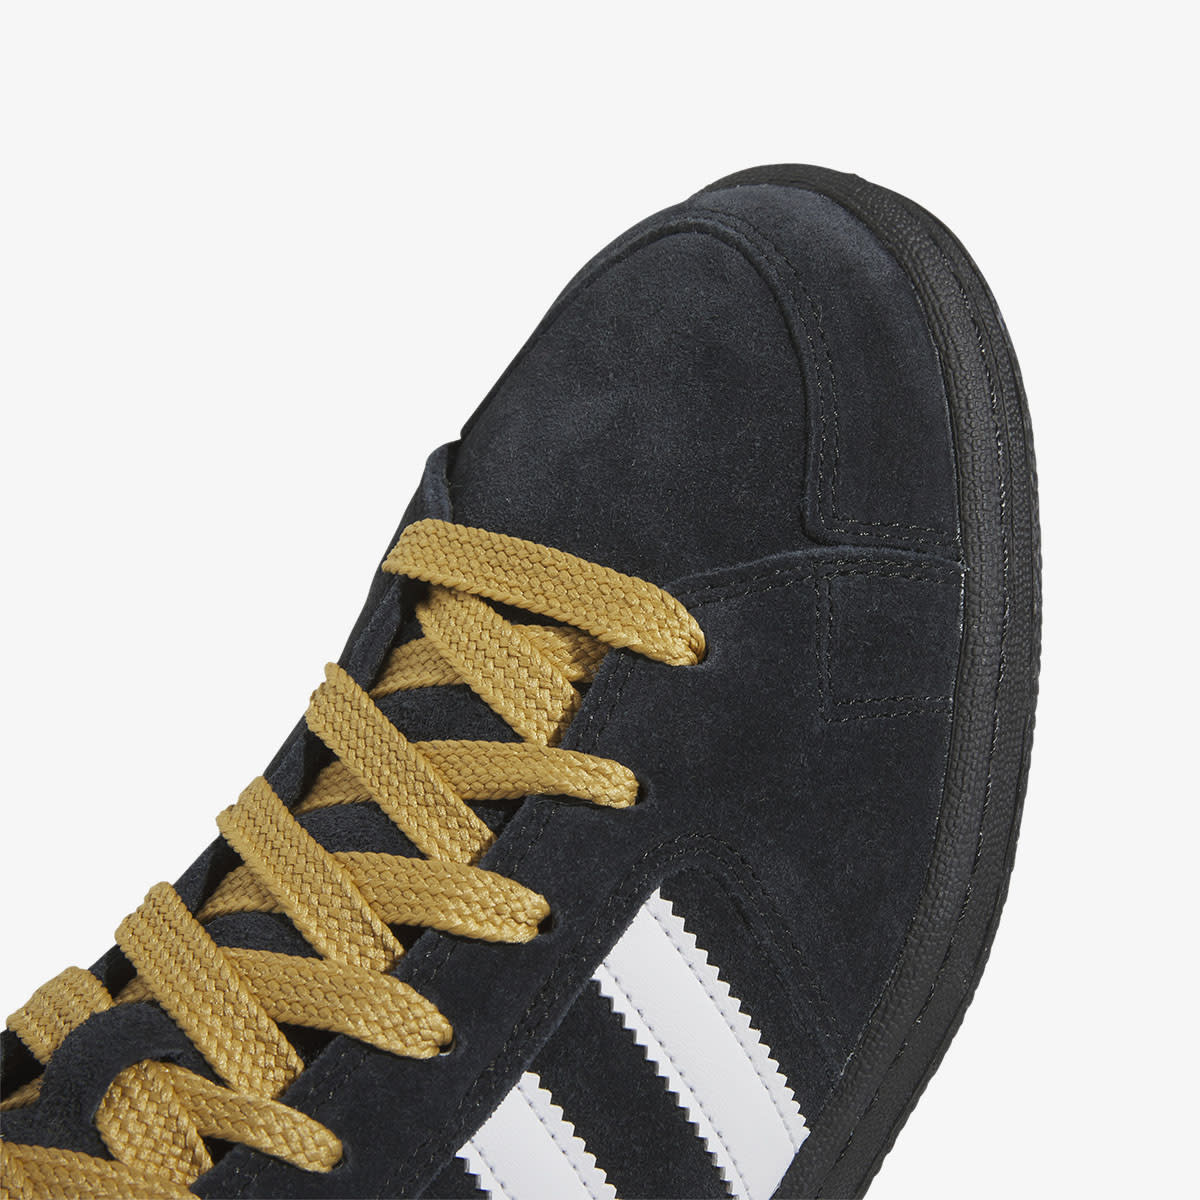 Adidas Sneeze Superskate (Black, White & Golden Beige) | END. Launches